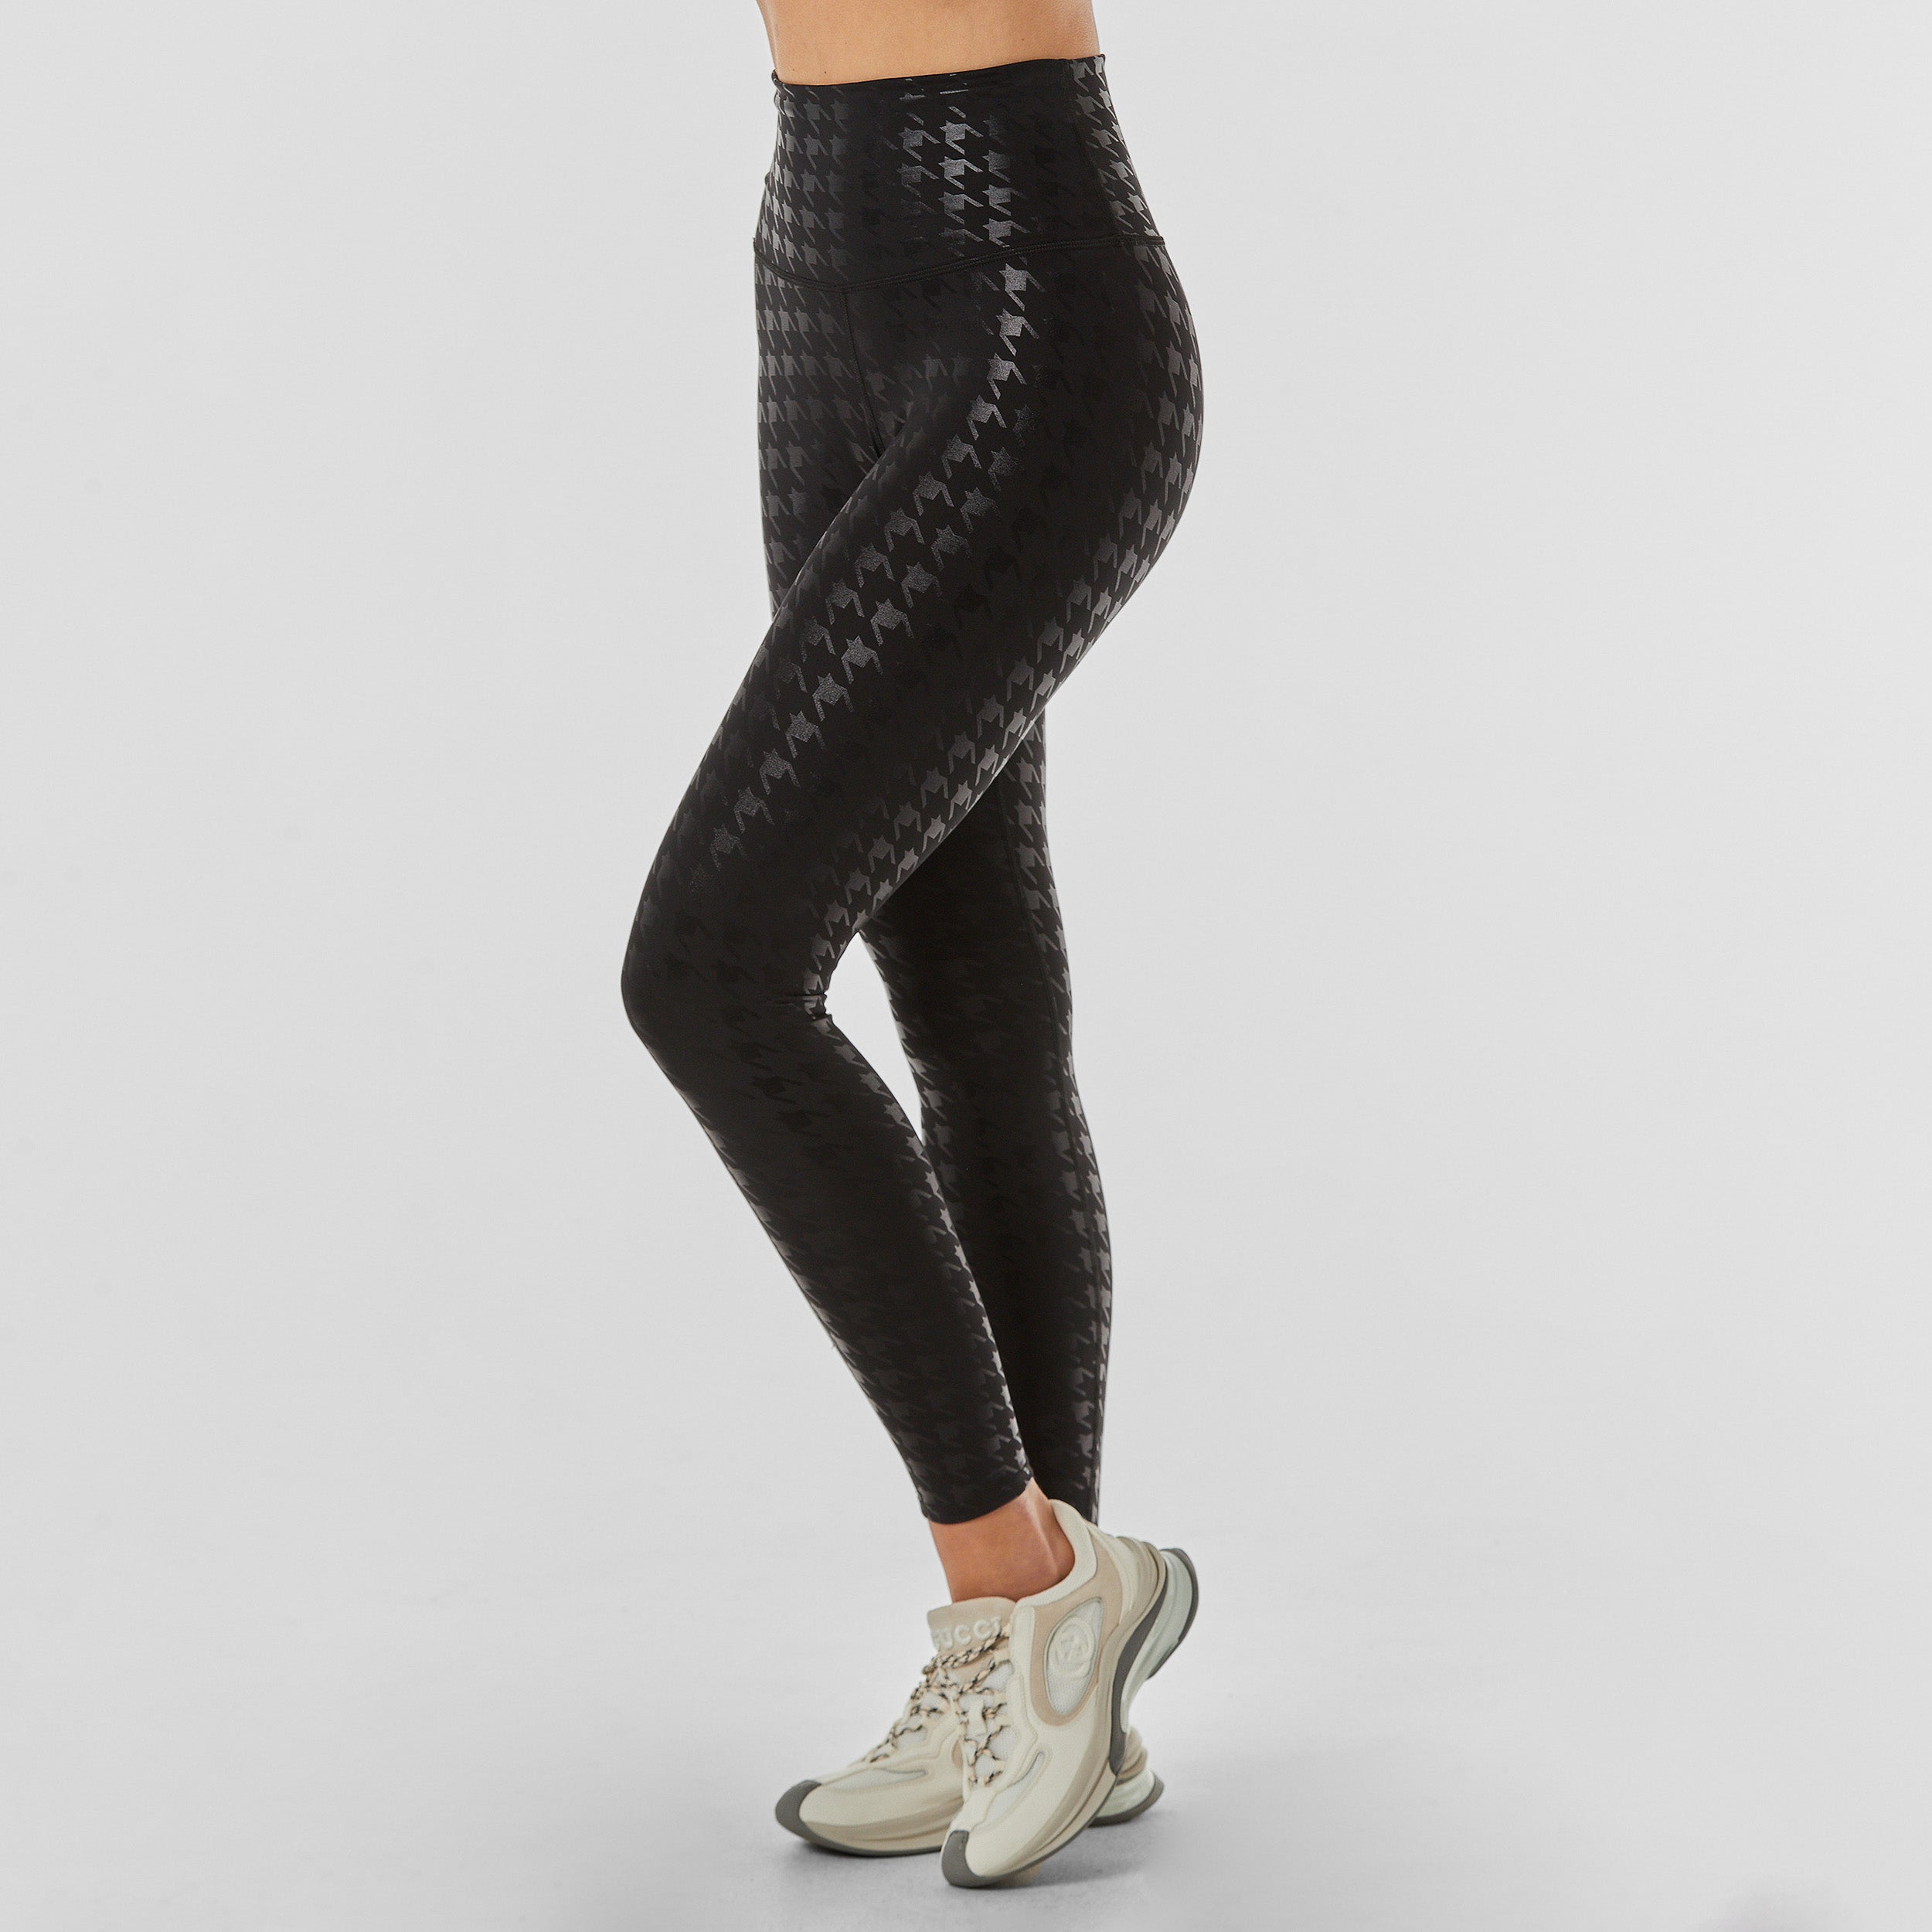 Side view of woman wearing black on black glossy houndstooth patterned legging